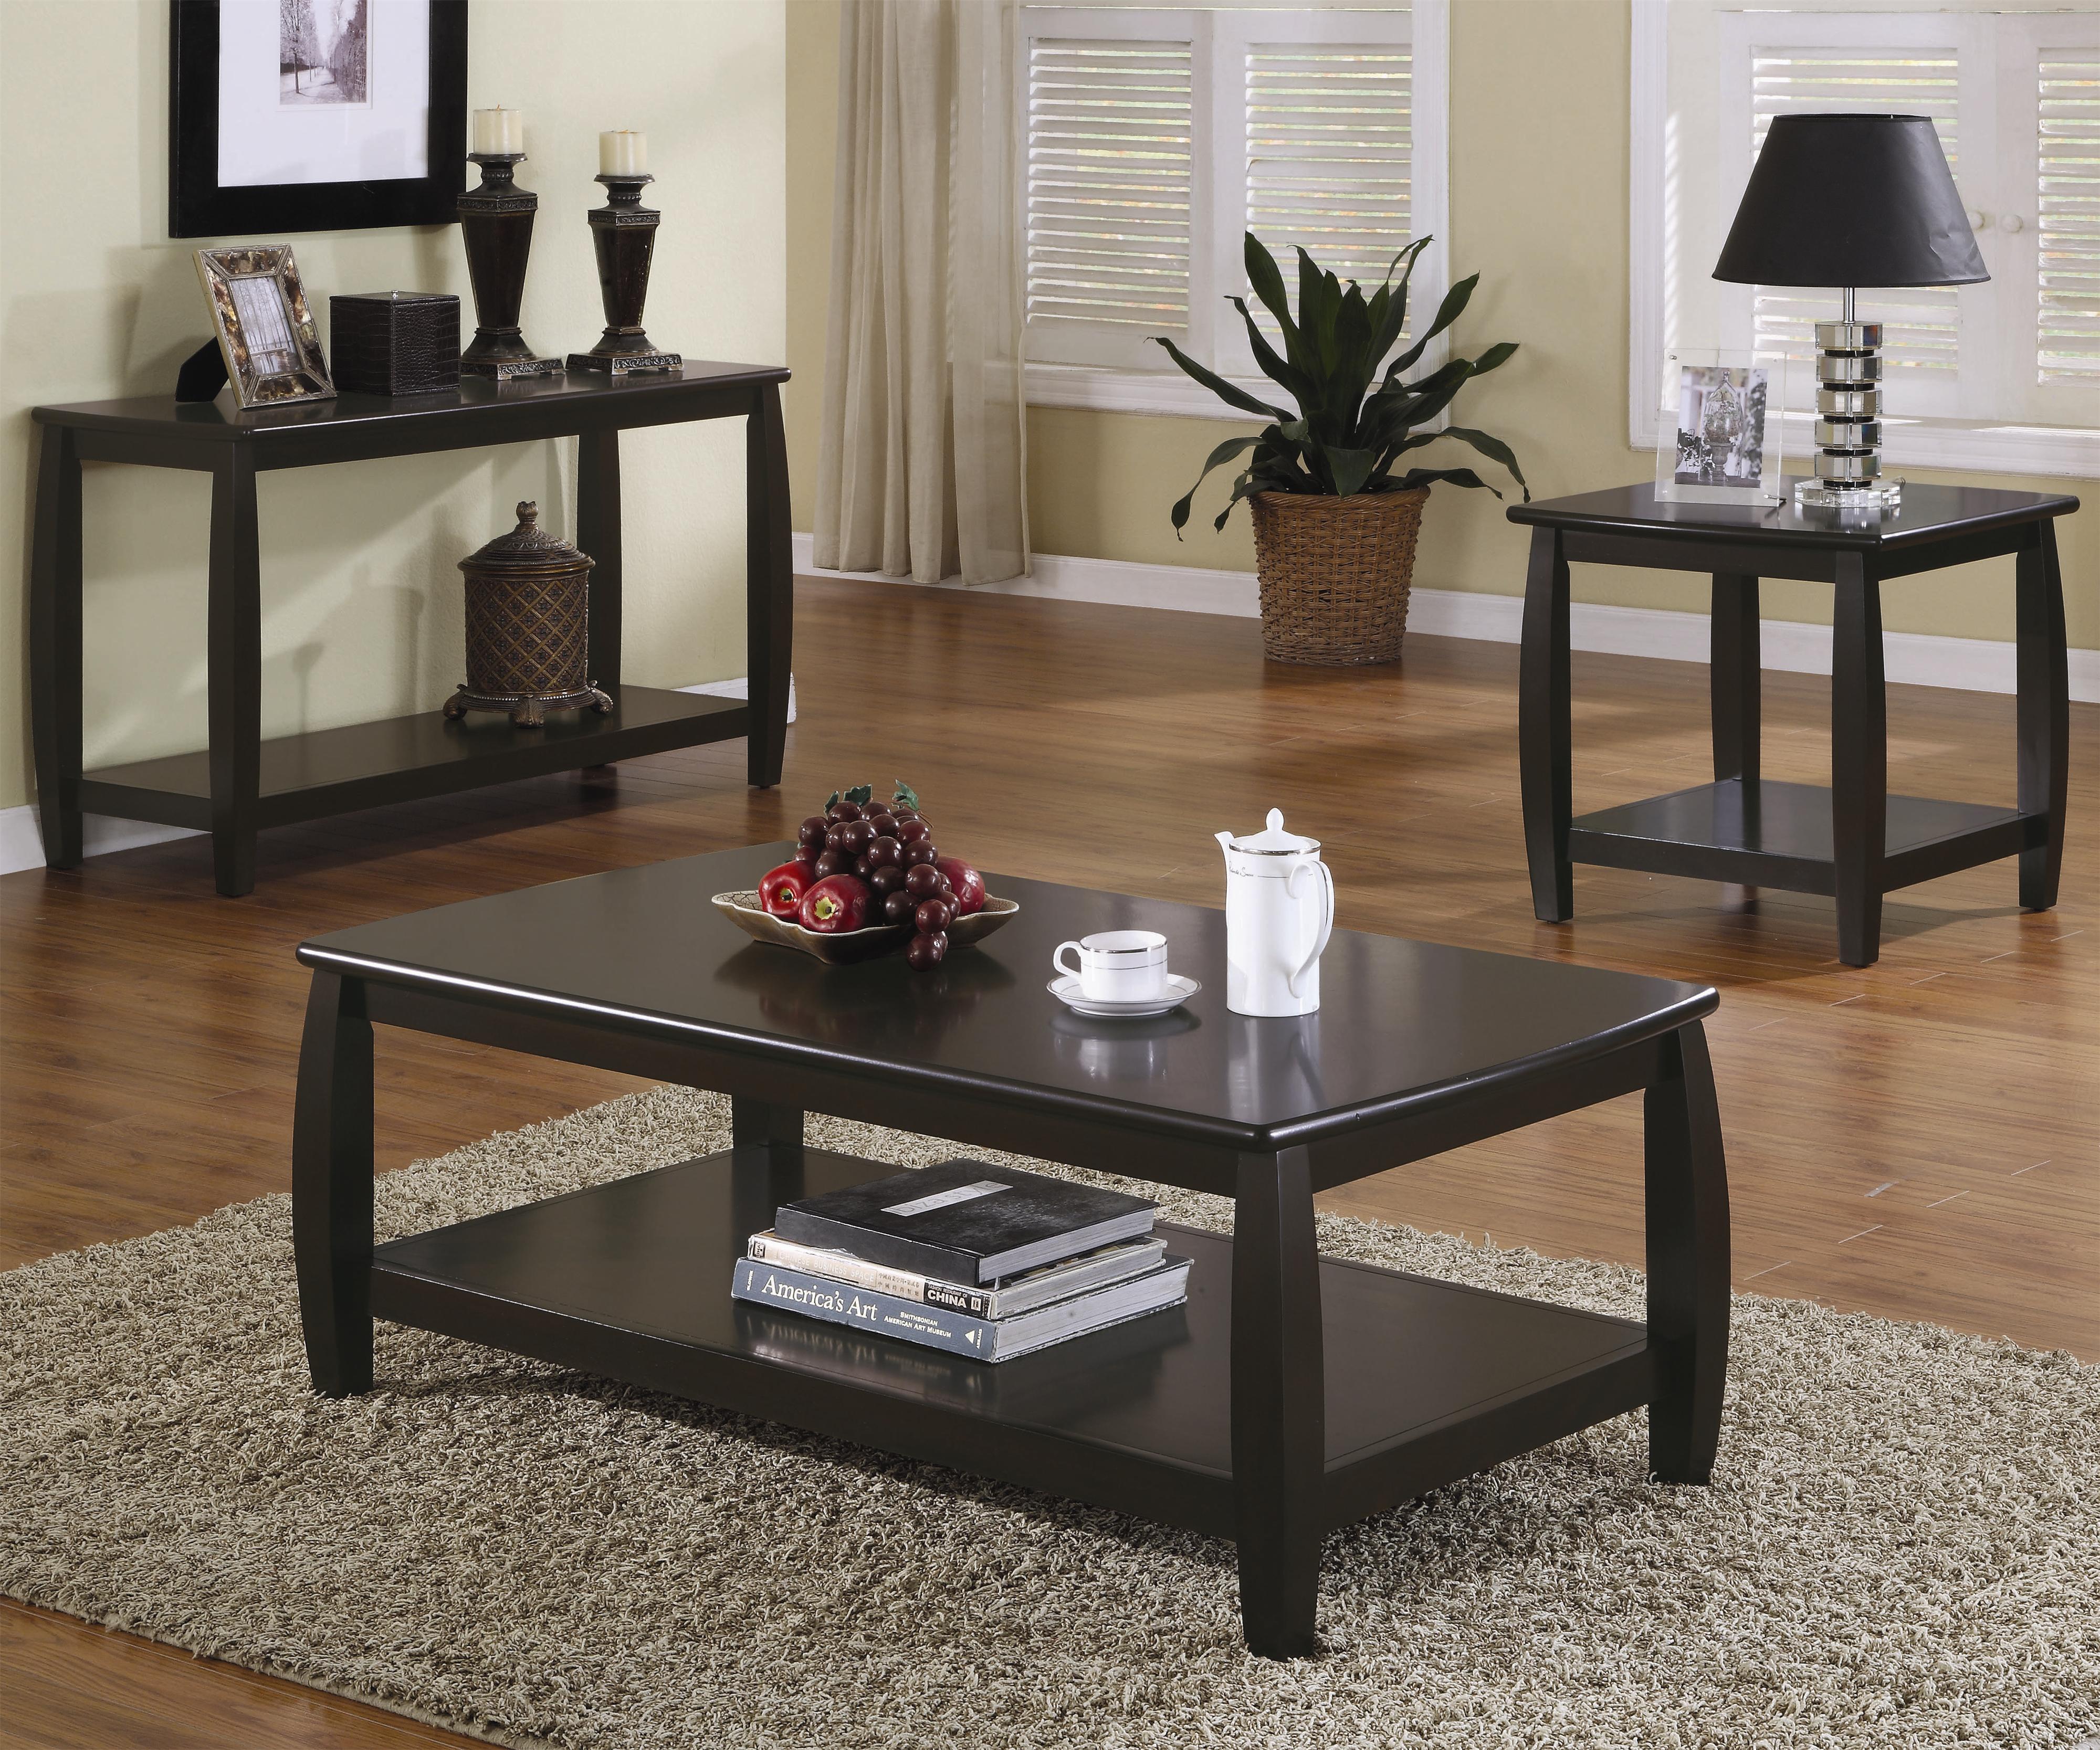 coffee tables contemporary cocktail table black and end ashley furniture flip flop sofa iron living room white oak side cute small dog crates medium size lamps interior design